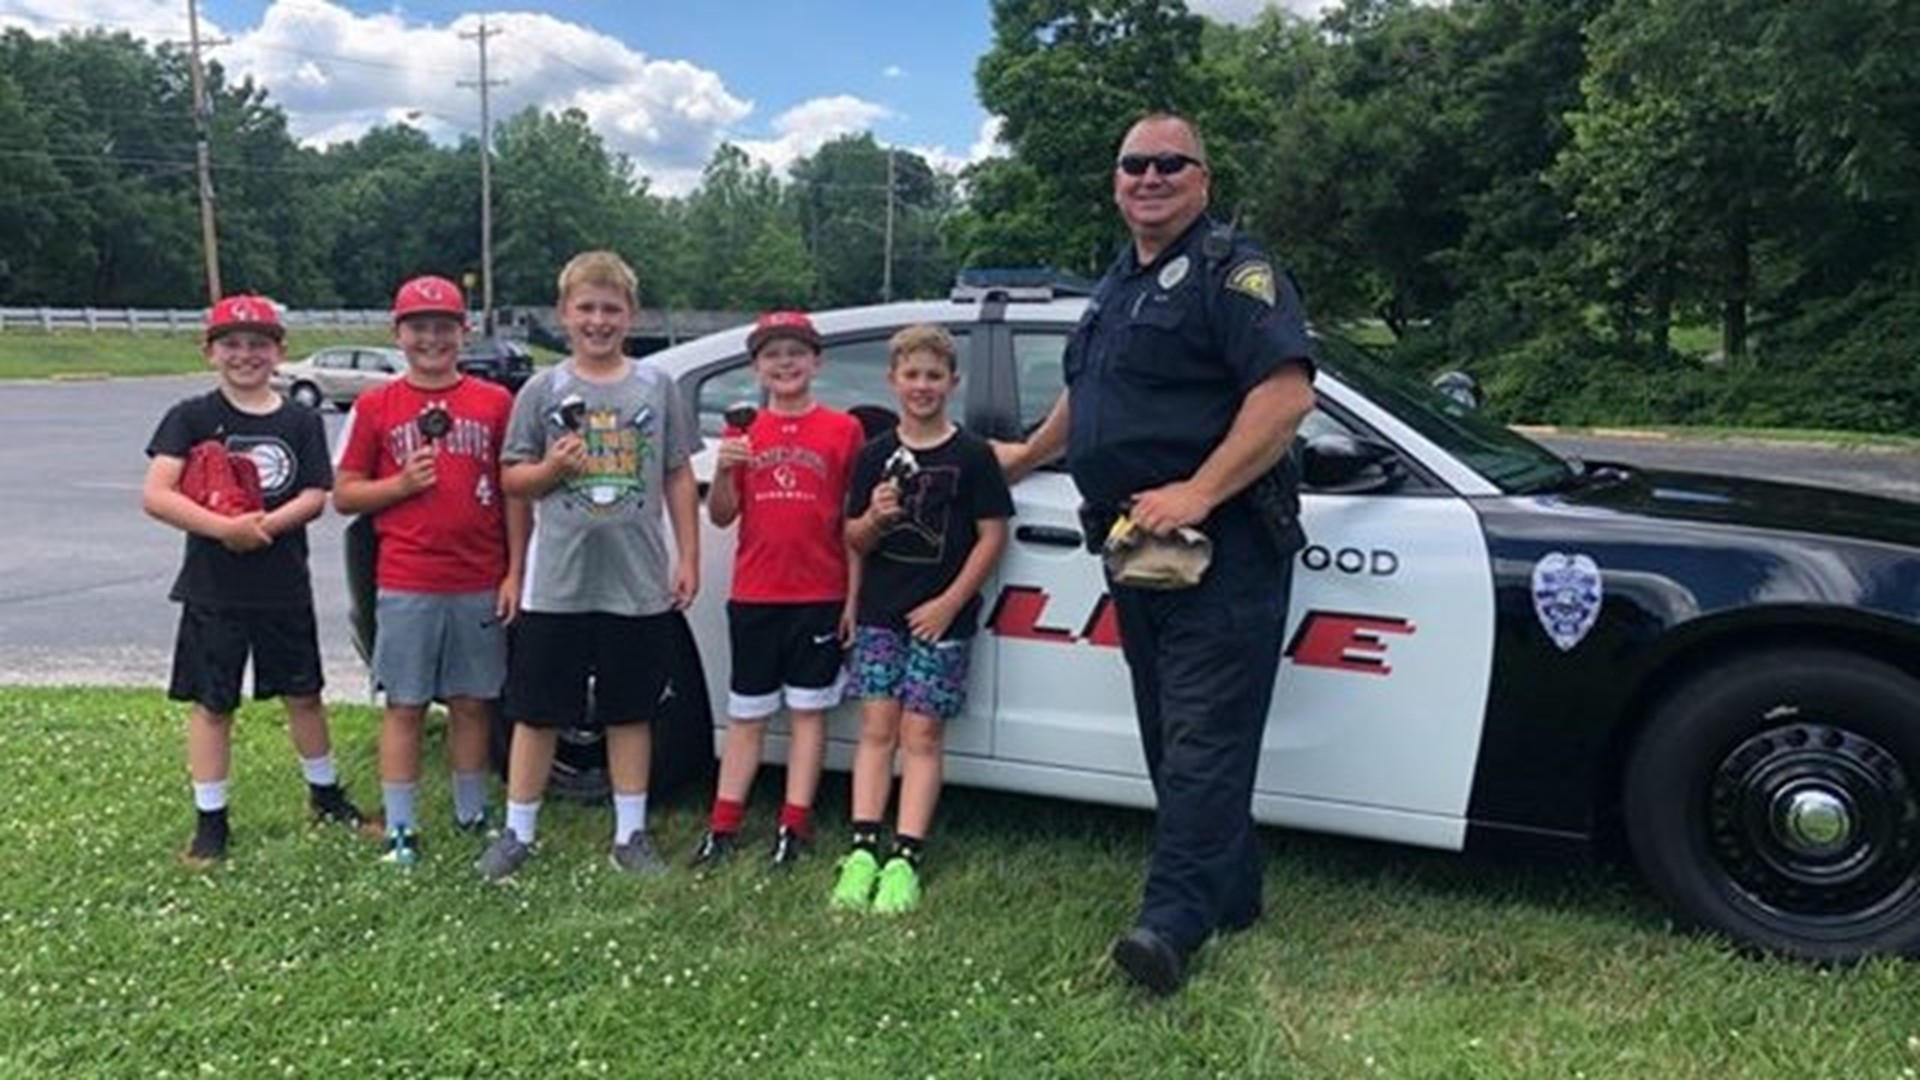 After hours playing baseball, a police officer in Greenwood treated five boys to Dilly Bars.